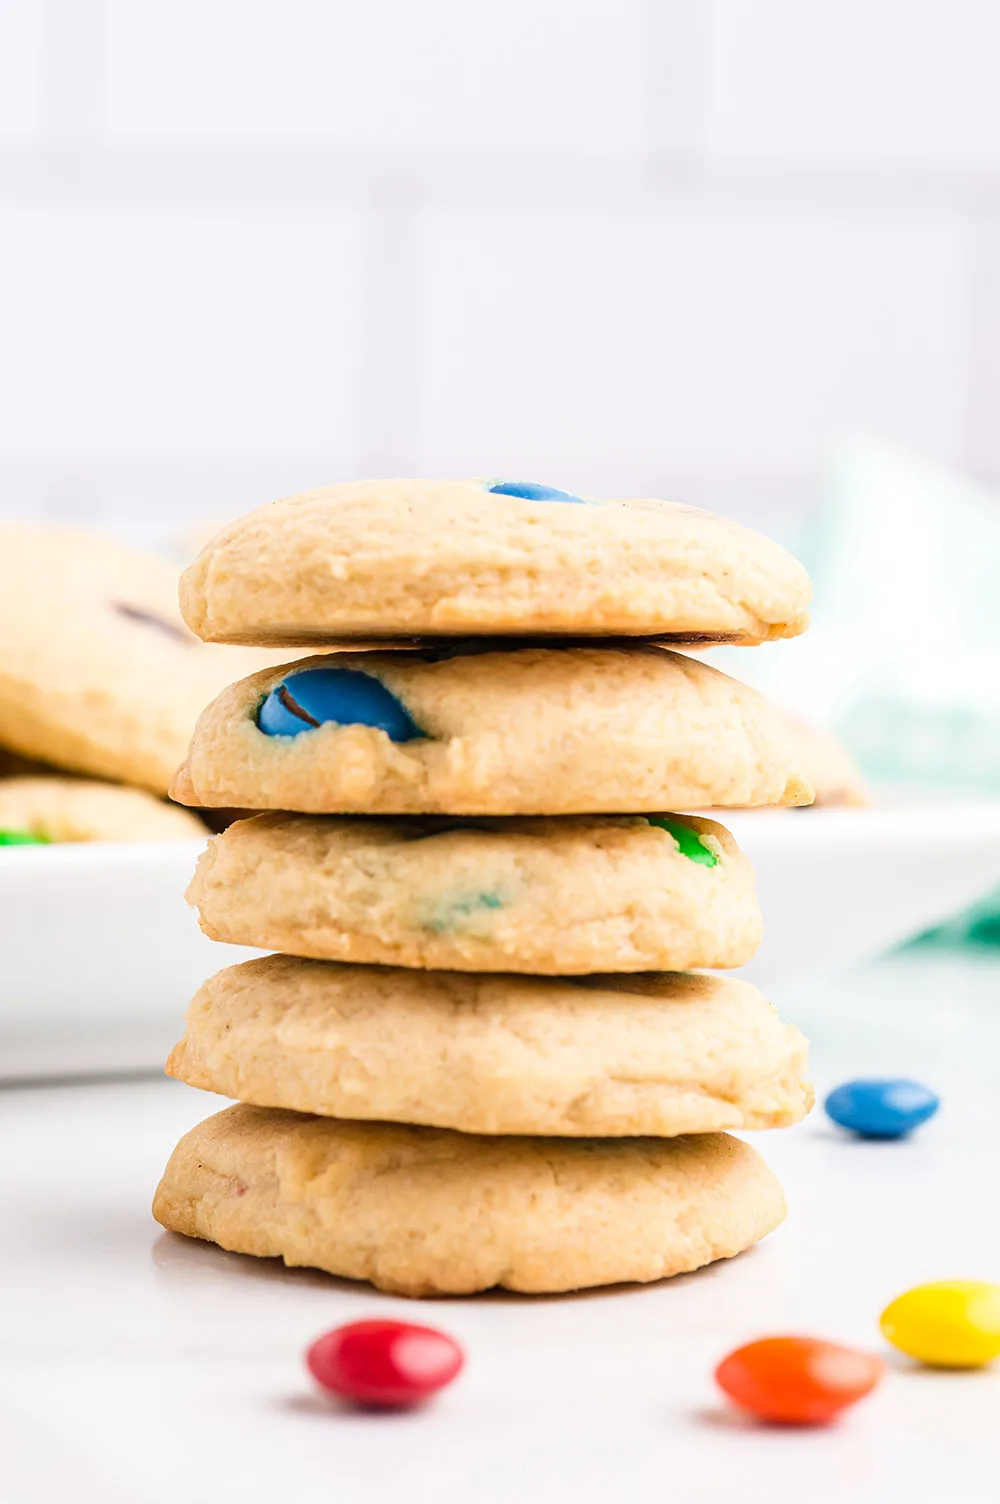 Stack of cookies with M&M candies on the table.